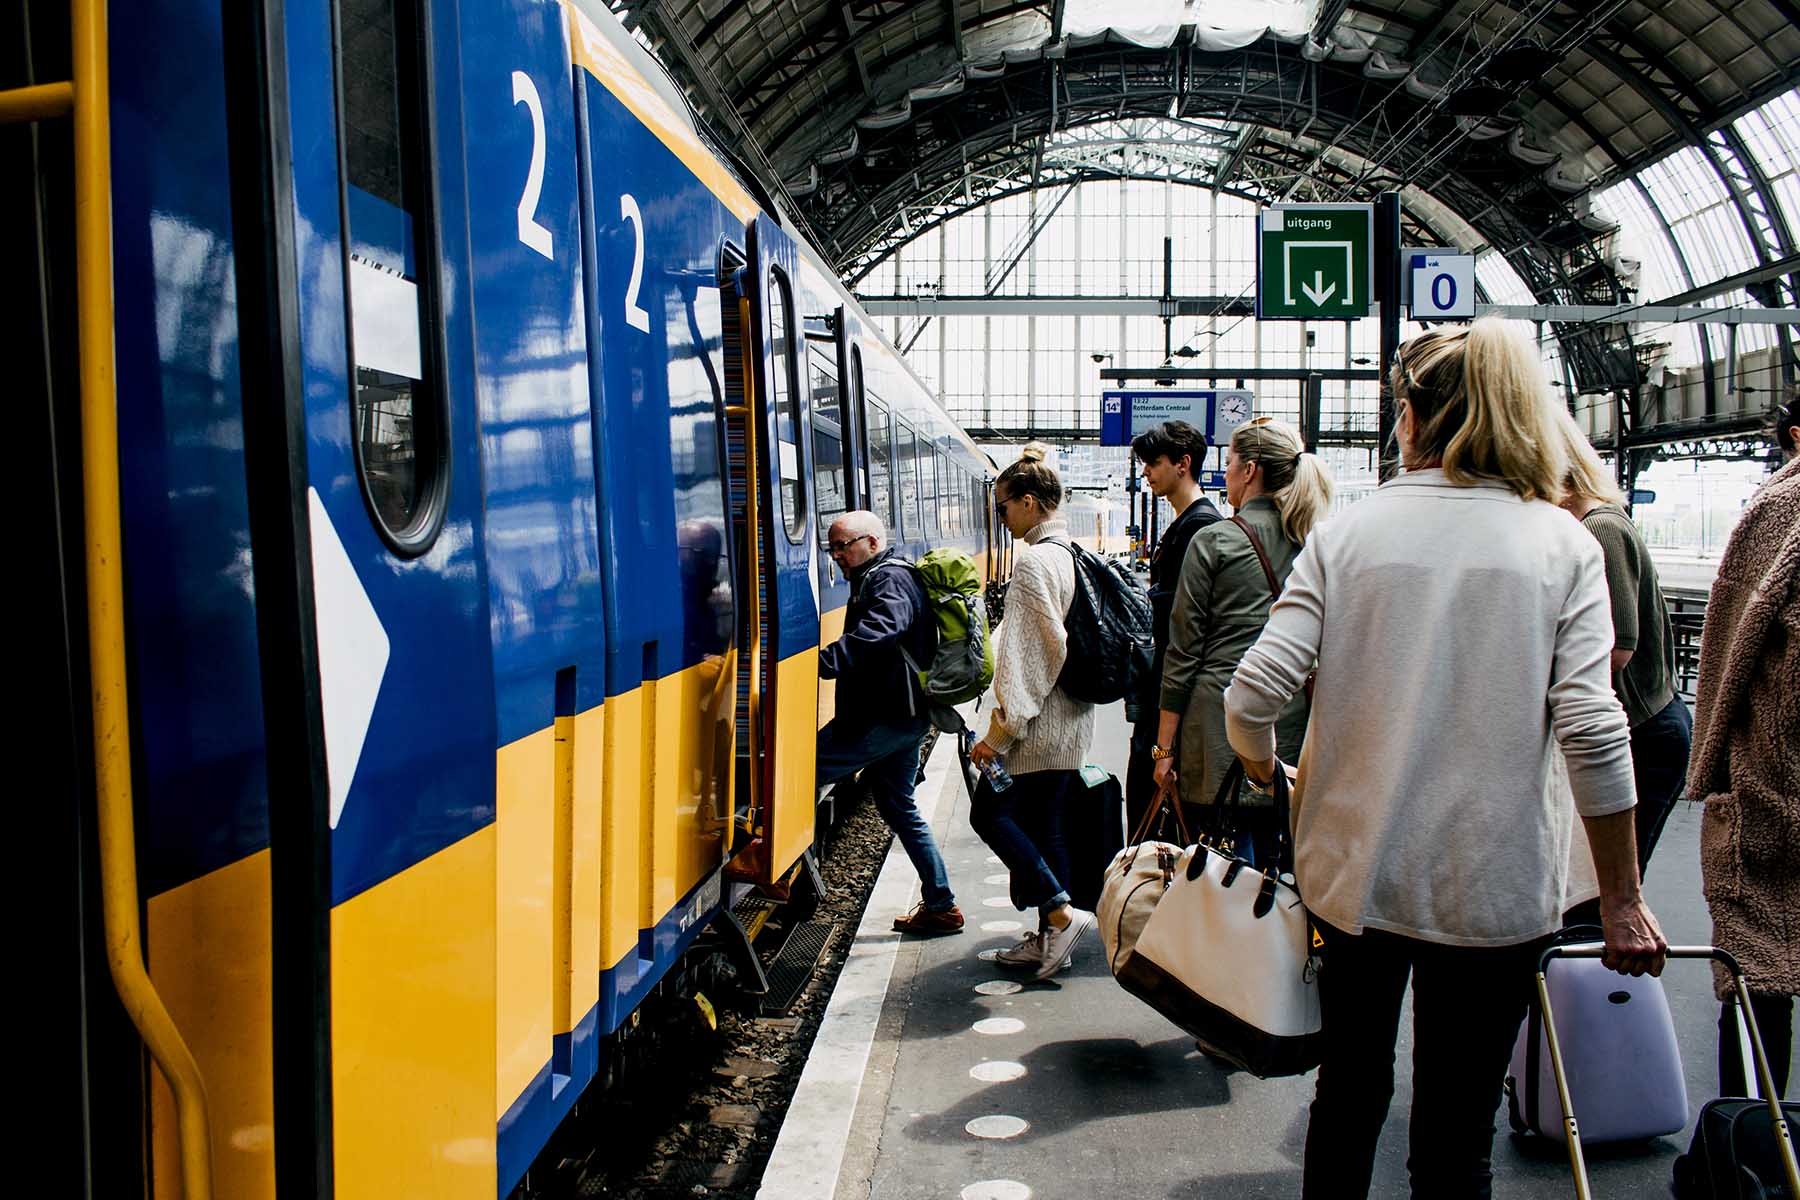 A group of people boarding the yellow NS train on a platform in Amsterdam, the Netherlands. Everyone is carrying large bags or traveling trollies.